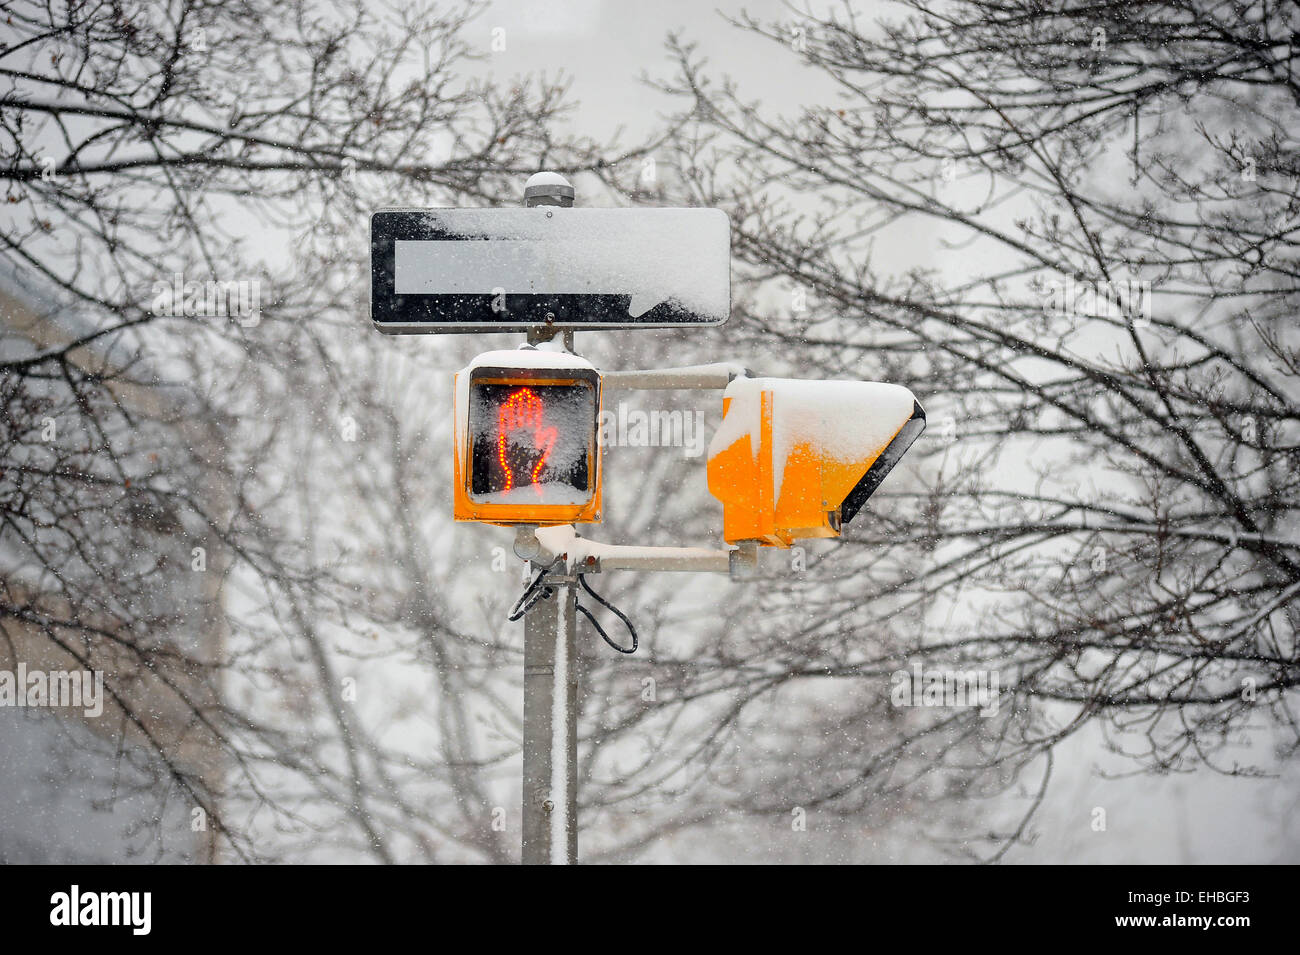 A one-way sign and a pedestrian crossing signal obscured by snow in London, Ontario in Canada. Stock Photo